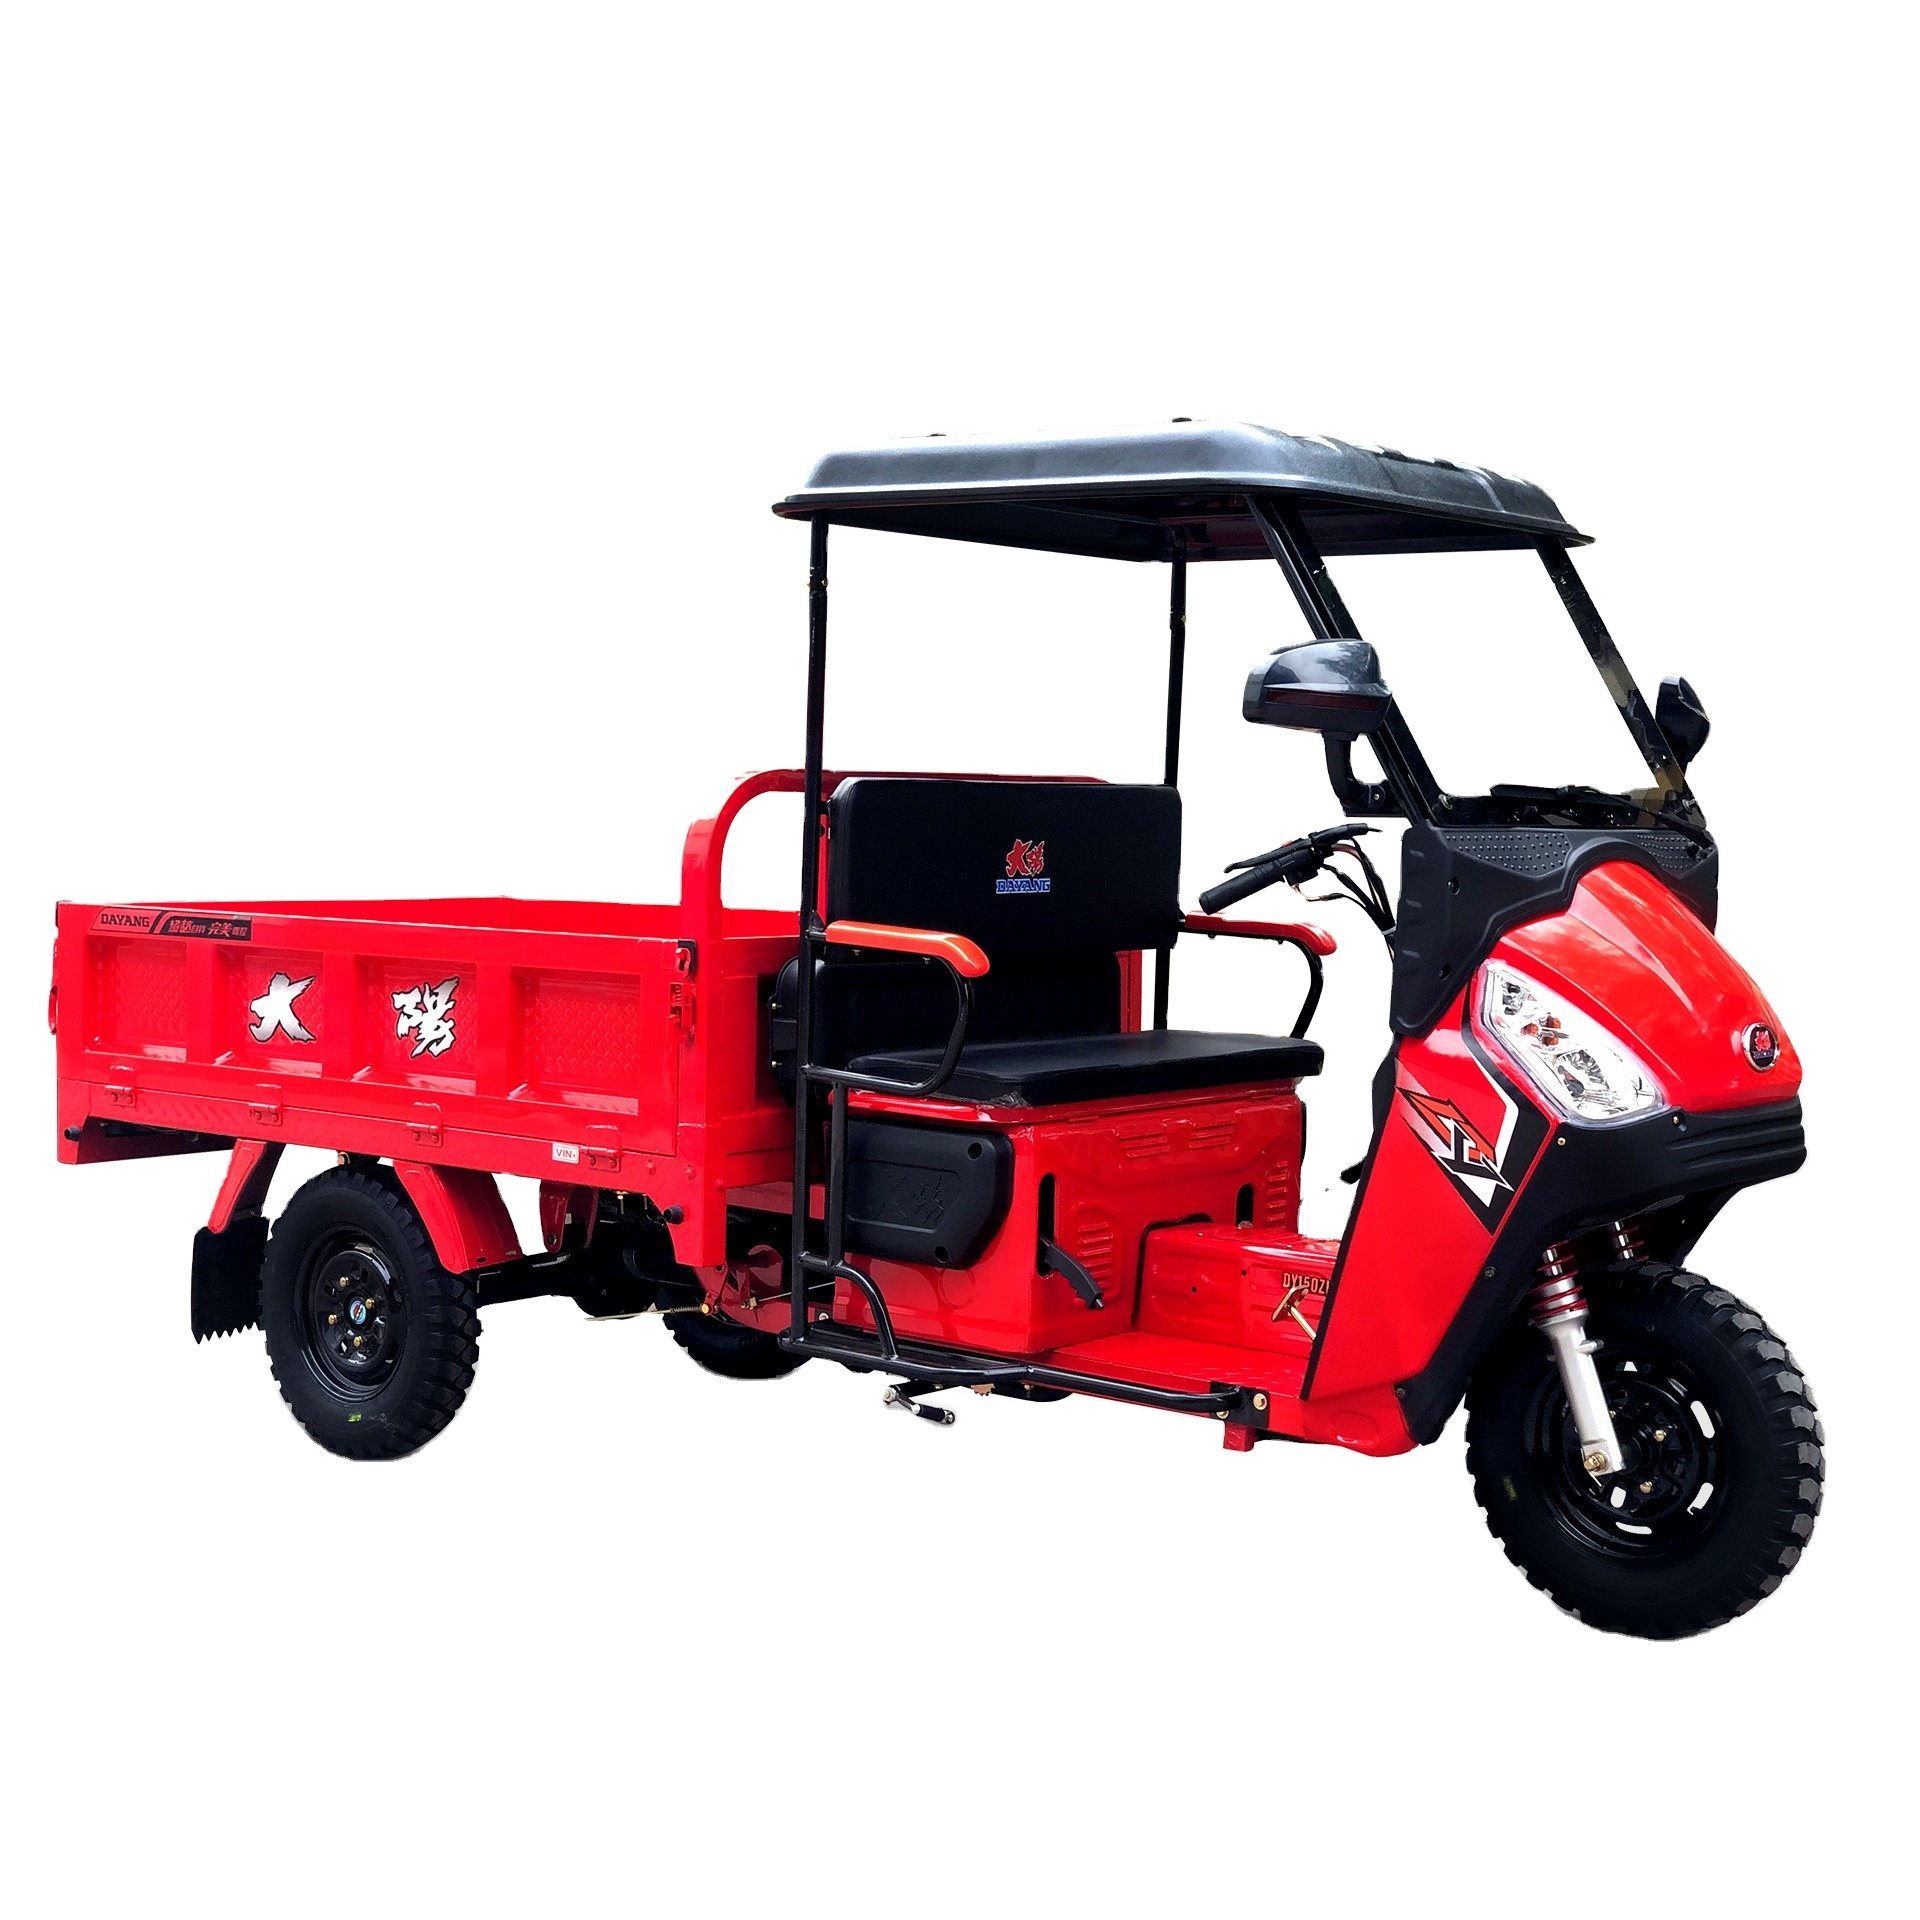 High quality 110cc air cooled engine used harga motor tricycle cargo petrol for adult power motorized tricycle